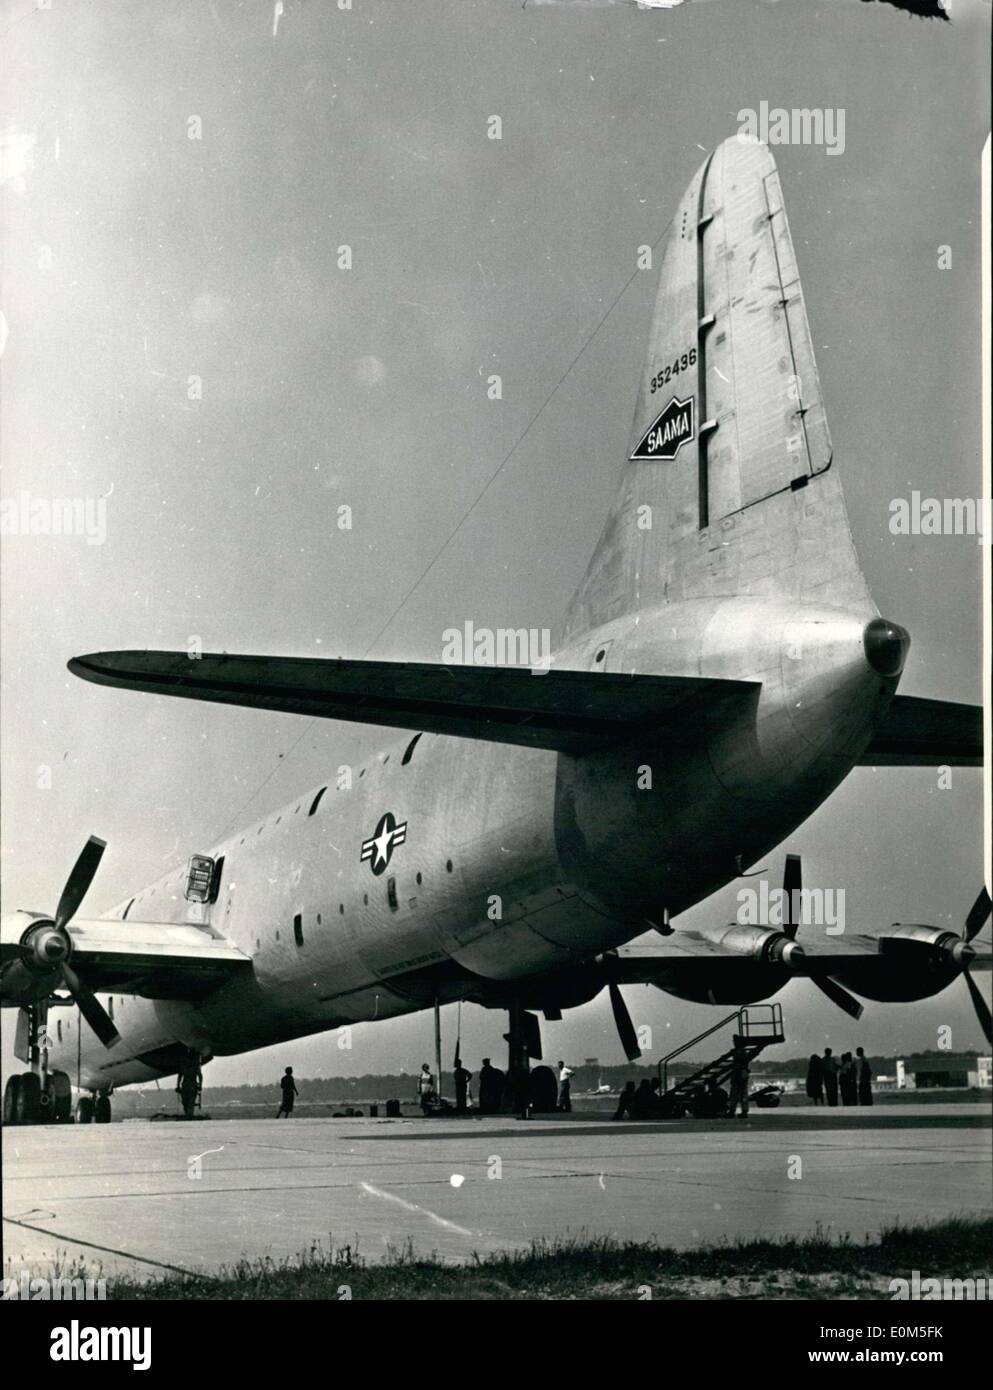 Aug. 15, 1953 - First time in Germany: The Goliath of America. Yesterday the Frankfurt airport welcomed the XC-99, the largest airplane in the world, from Kelly, Texas. The XC-99, with its 25 man crew completed its first 6,170 mile, 31 hour long transatlantic flight. This plane, built in 1948, unites many superlatives together. She can haul, with a non-stop range of 8,000 miles at a speed of 300 miles, 50 tons of cargo, a cargo equivalent to 400 fully-equipped troops in a mission of war.She has a wingspan of 67 meters, is 53 meters long, and her tail-wing juts 17 meters in the air Stock Photo